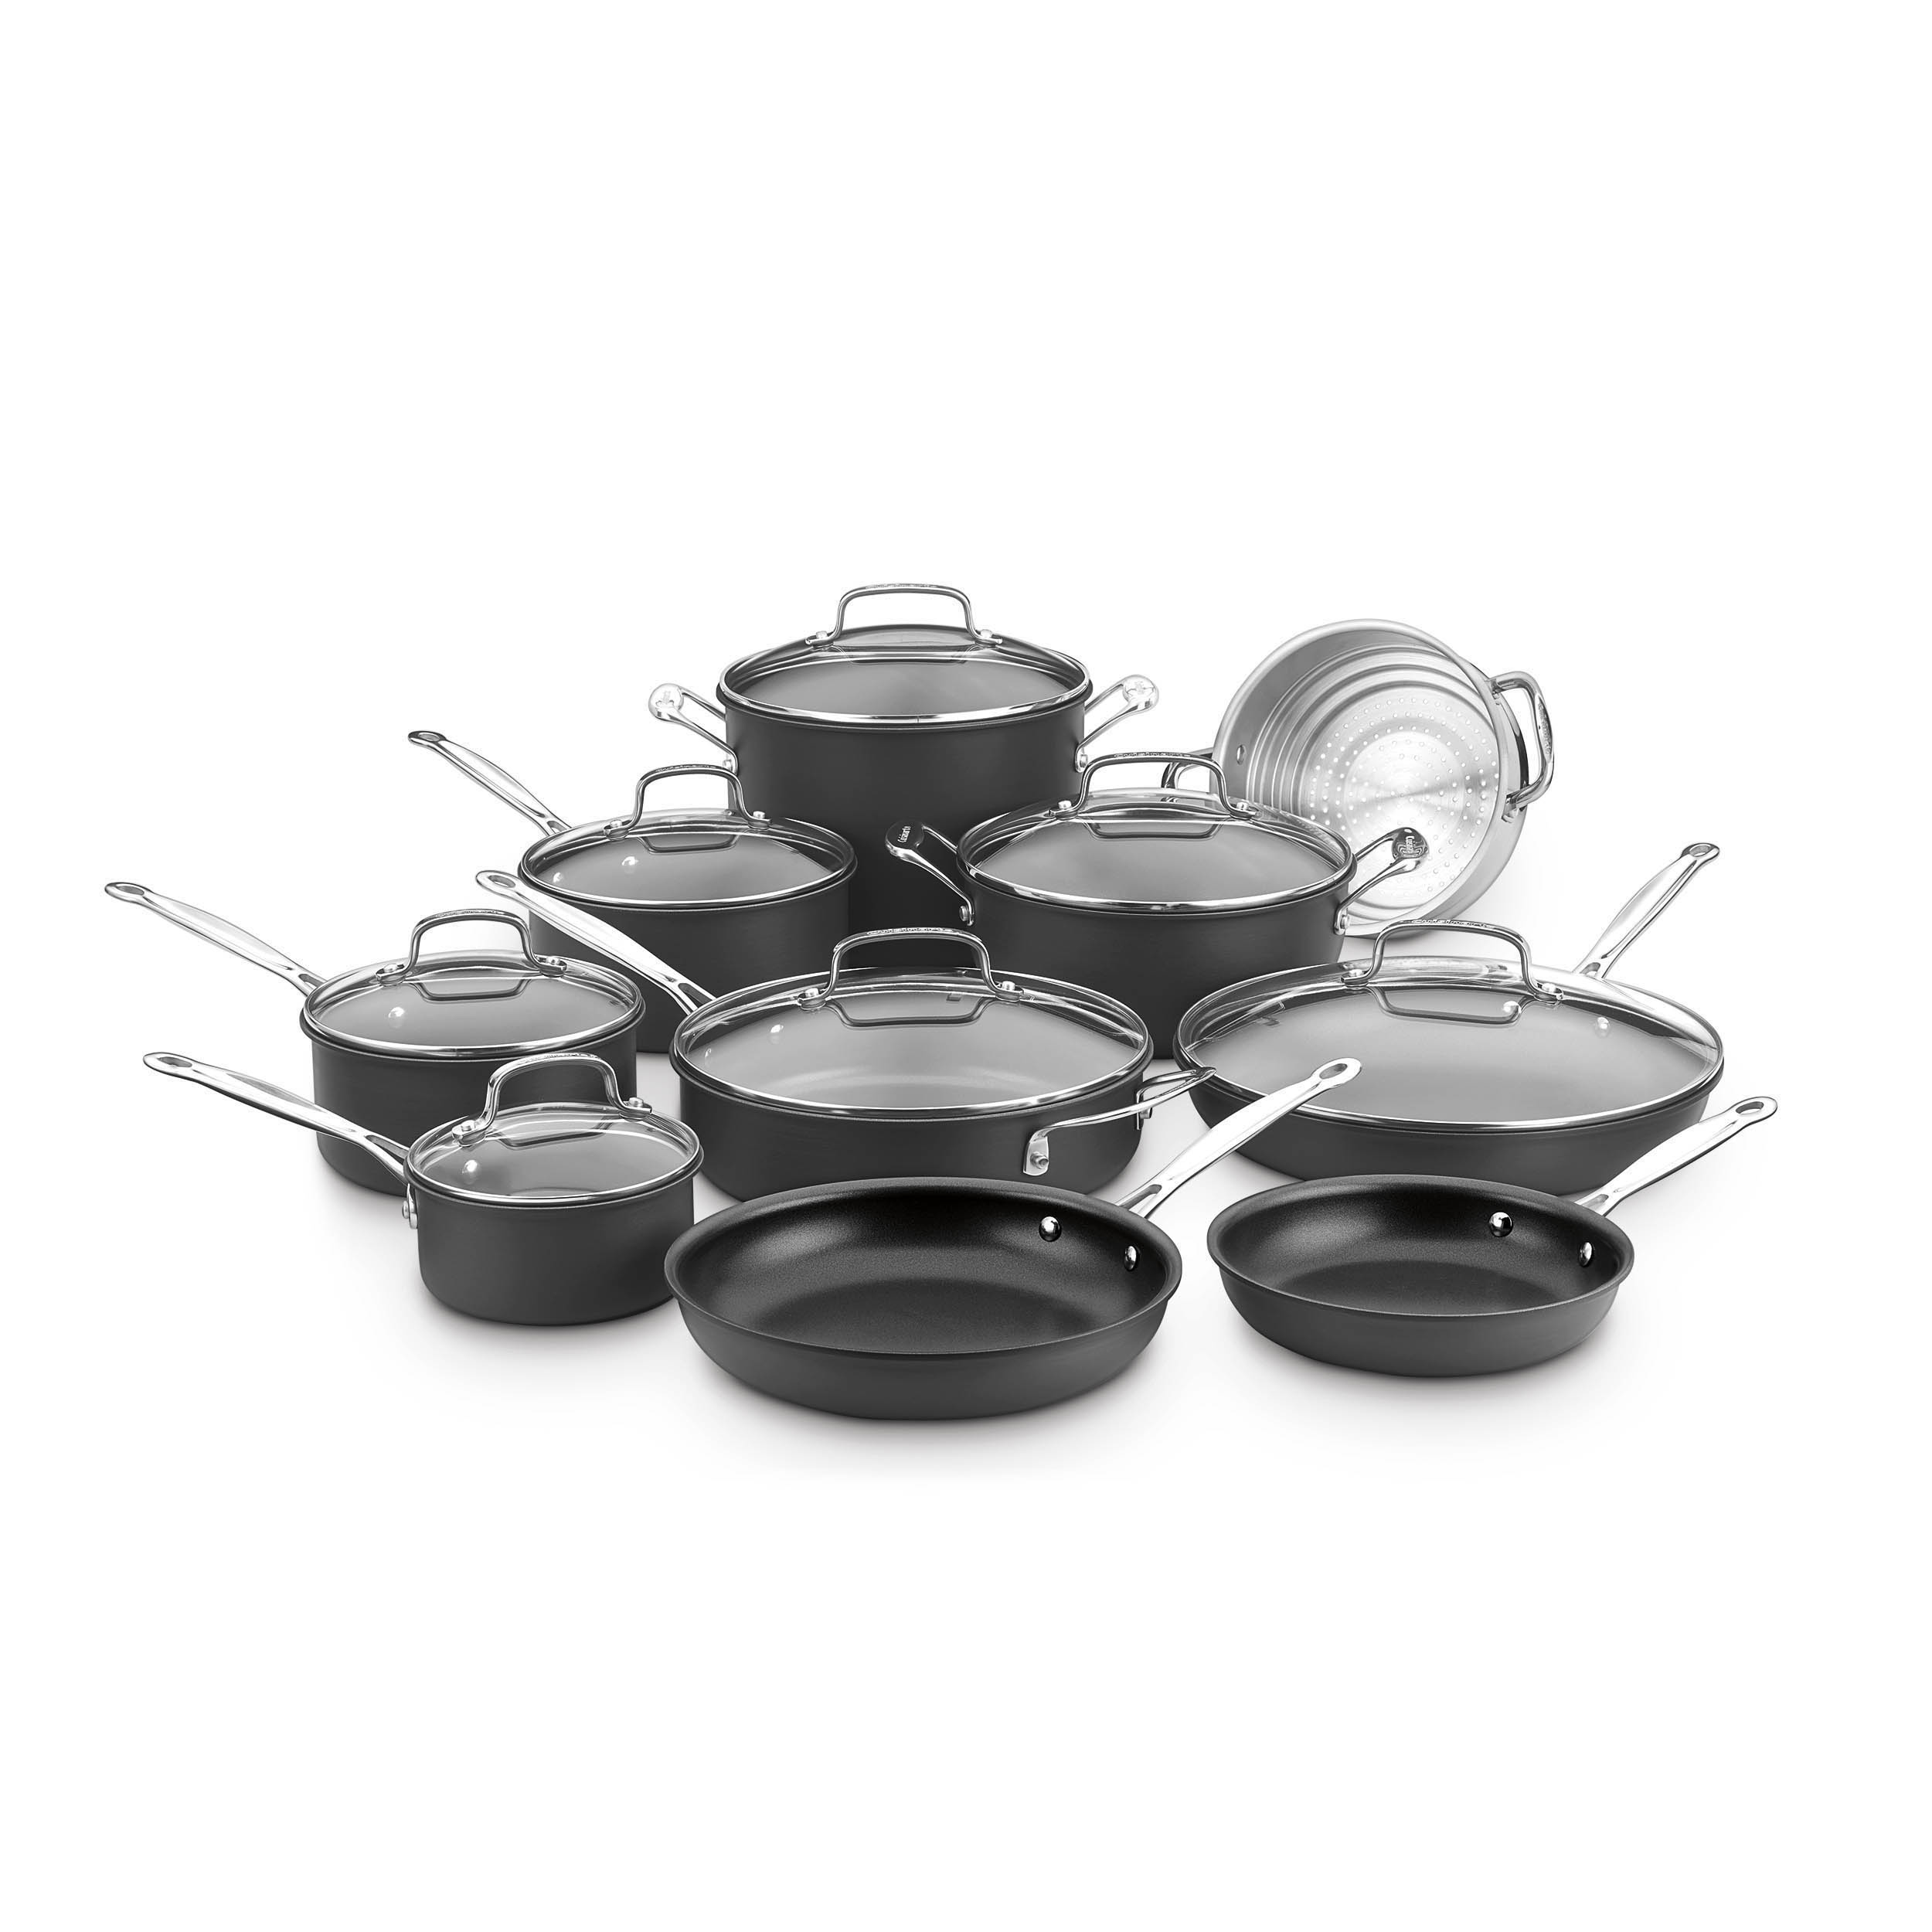 Cuisinart Chef's Classic Non-Stick Hard Anodized, 17 Piece Set, Black, 66-17N - image 1 of 2